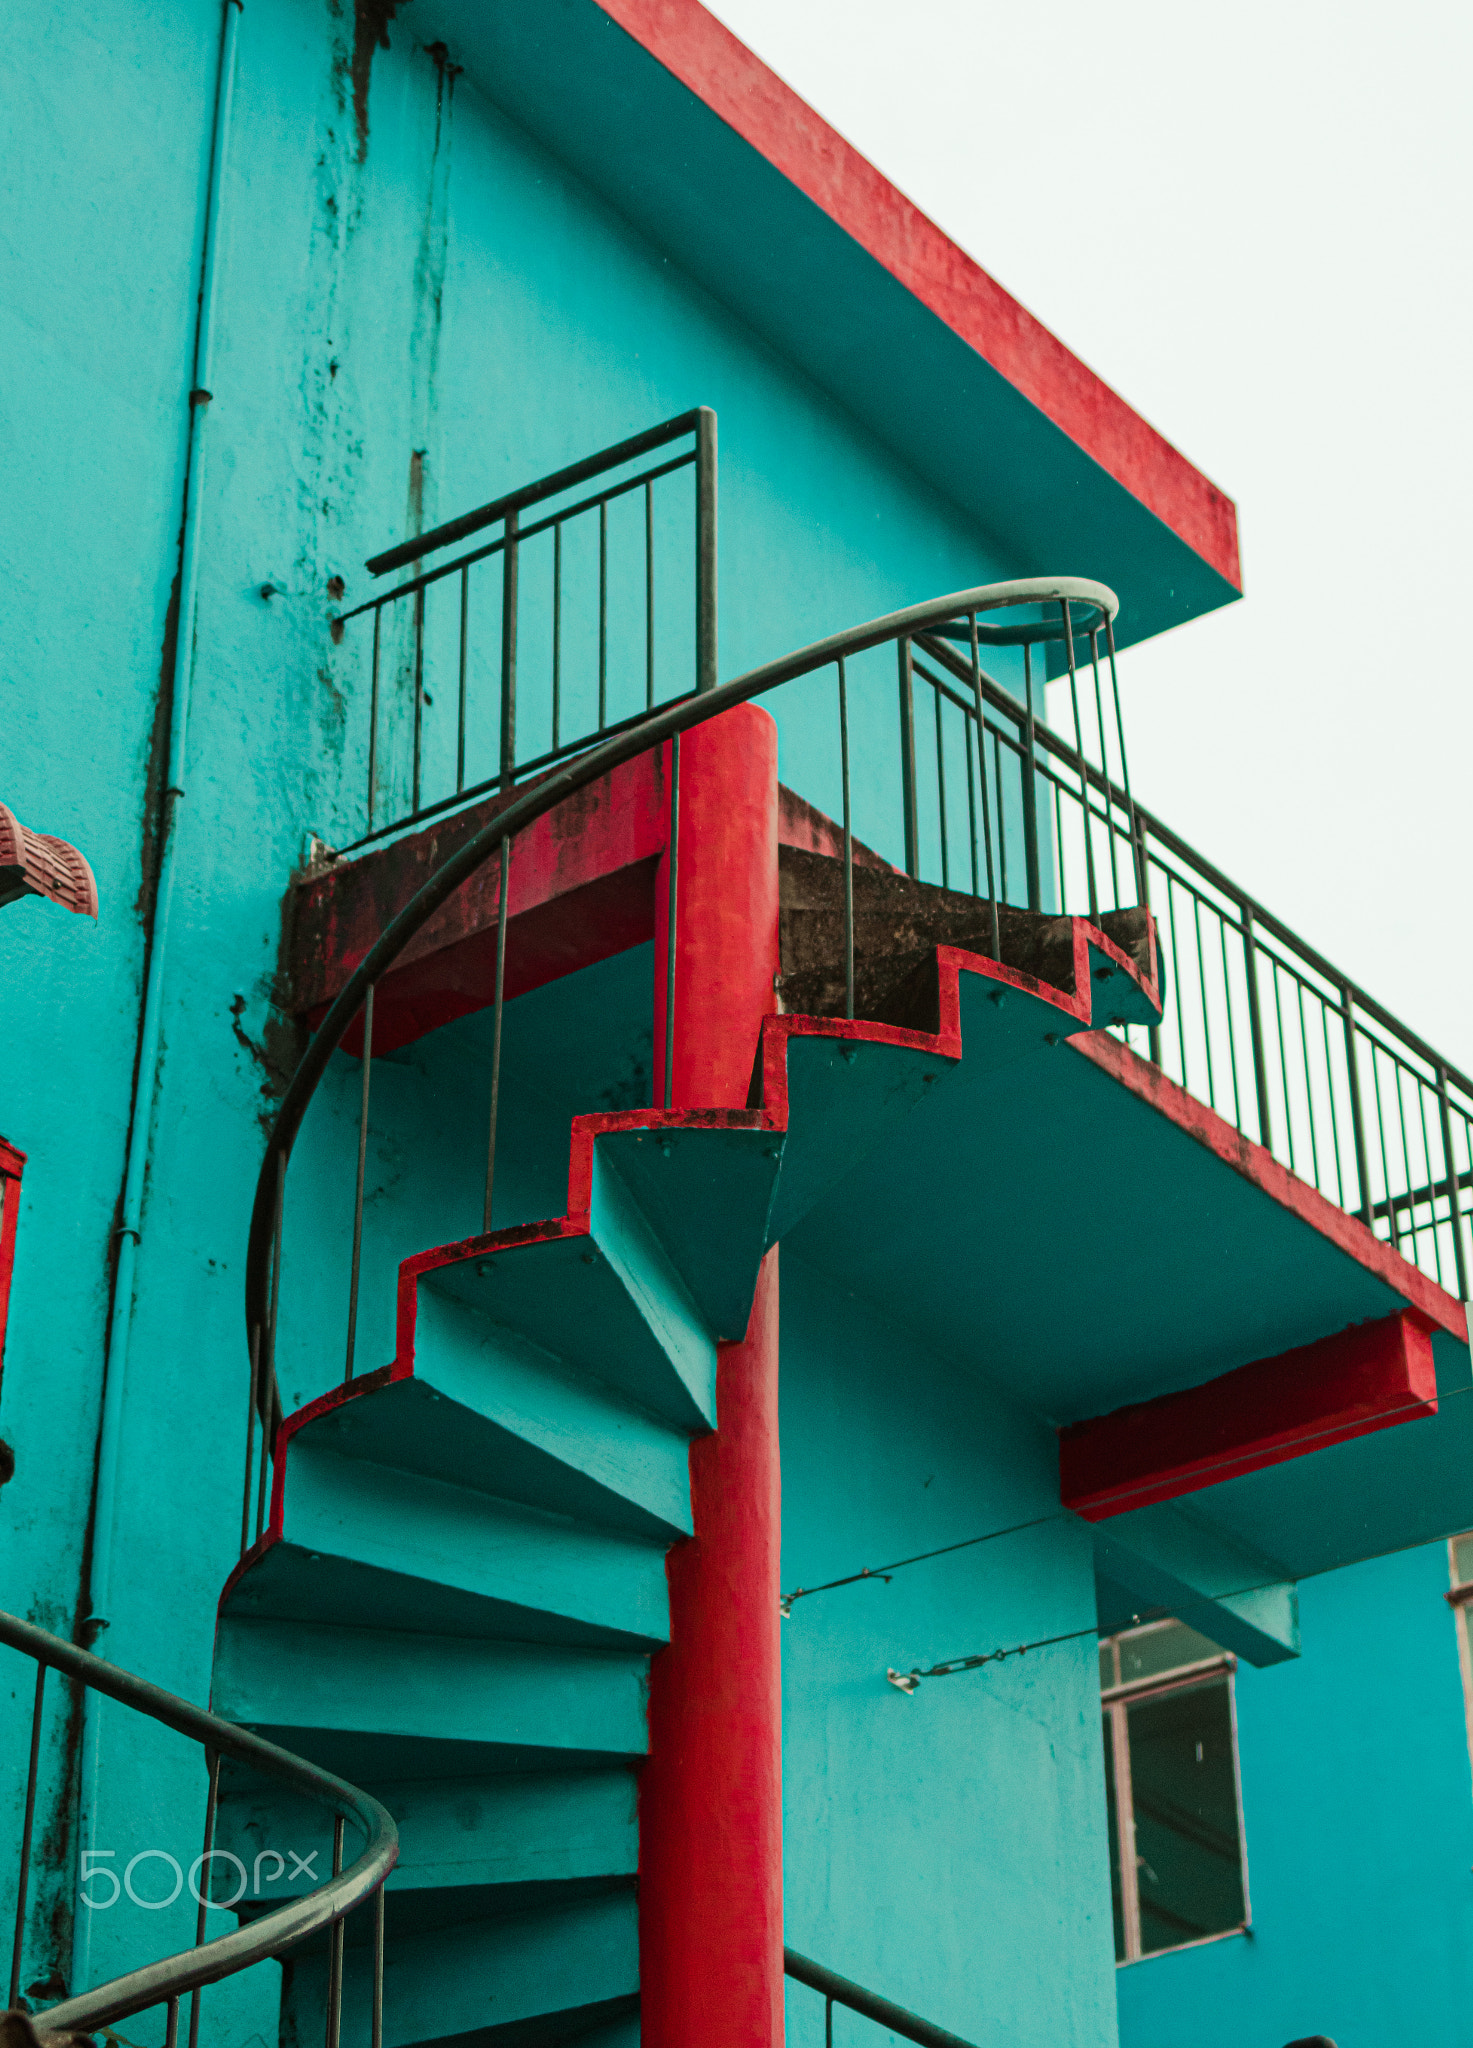 Beautiful spiral staircase on the side of a green and red color building in Perlis, Malaysia.